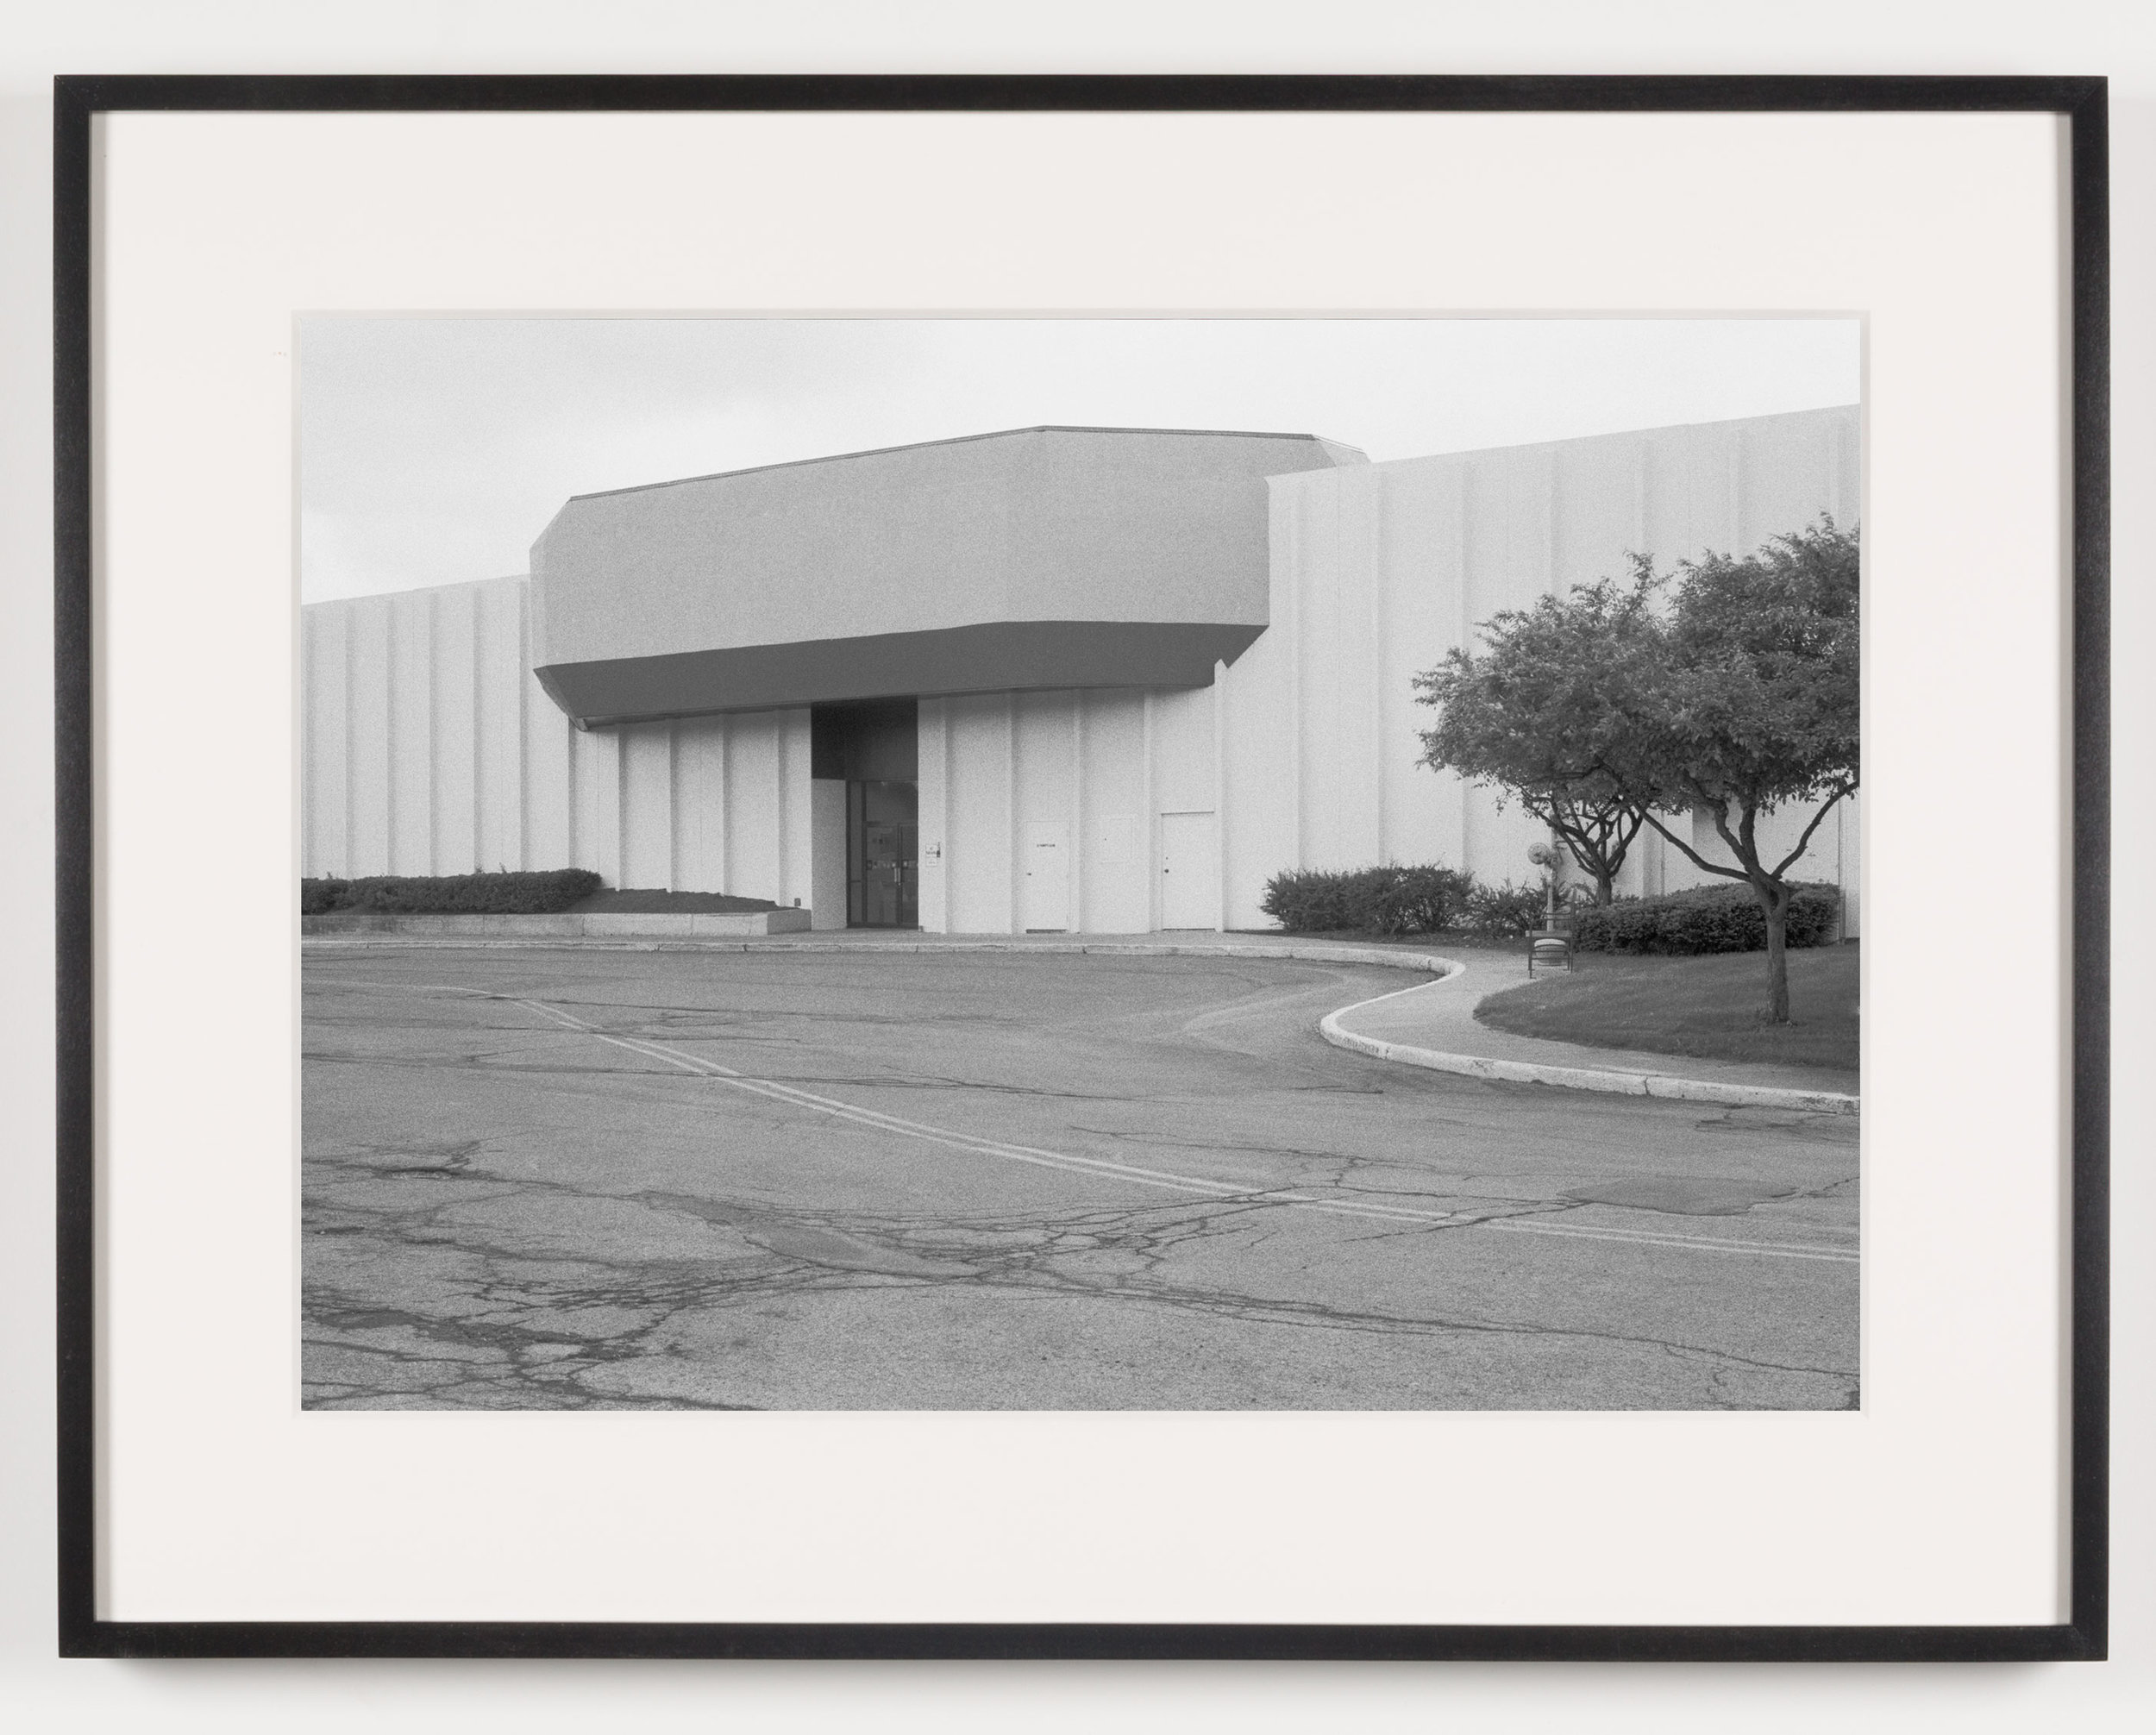   Midway Mall (View of Exterior, 'Sears'), Elyria, OH, Est. 1965   2011  Epson Ultrachrome K3 archival ink jet print on Hahnemühle Photo Rag paper  21 5/8 x 28 1/8 inches   American Passages, 2001–2011    A Diagram of Forces, 2011     